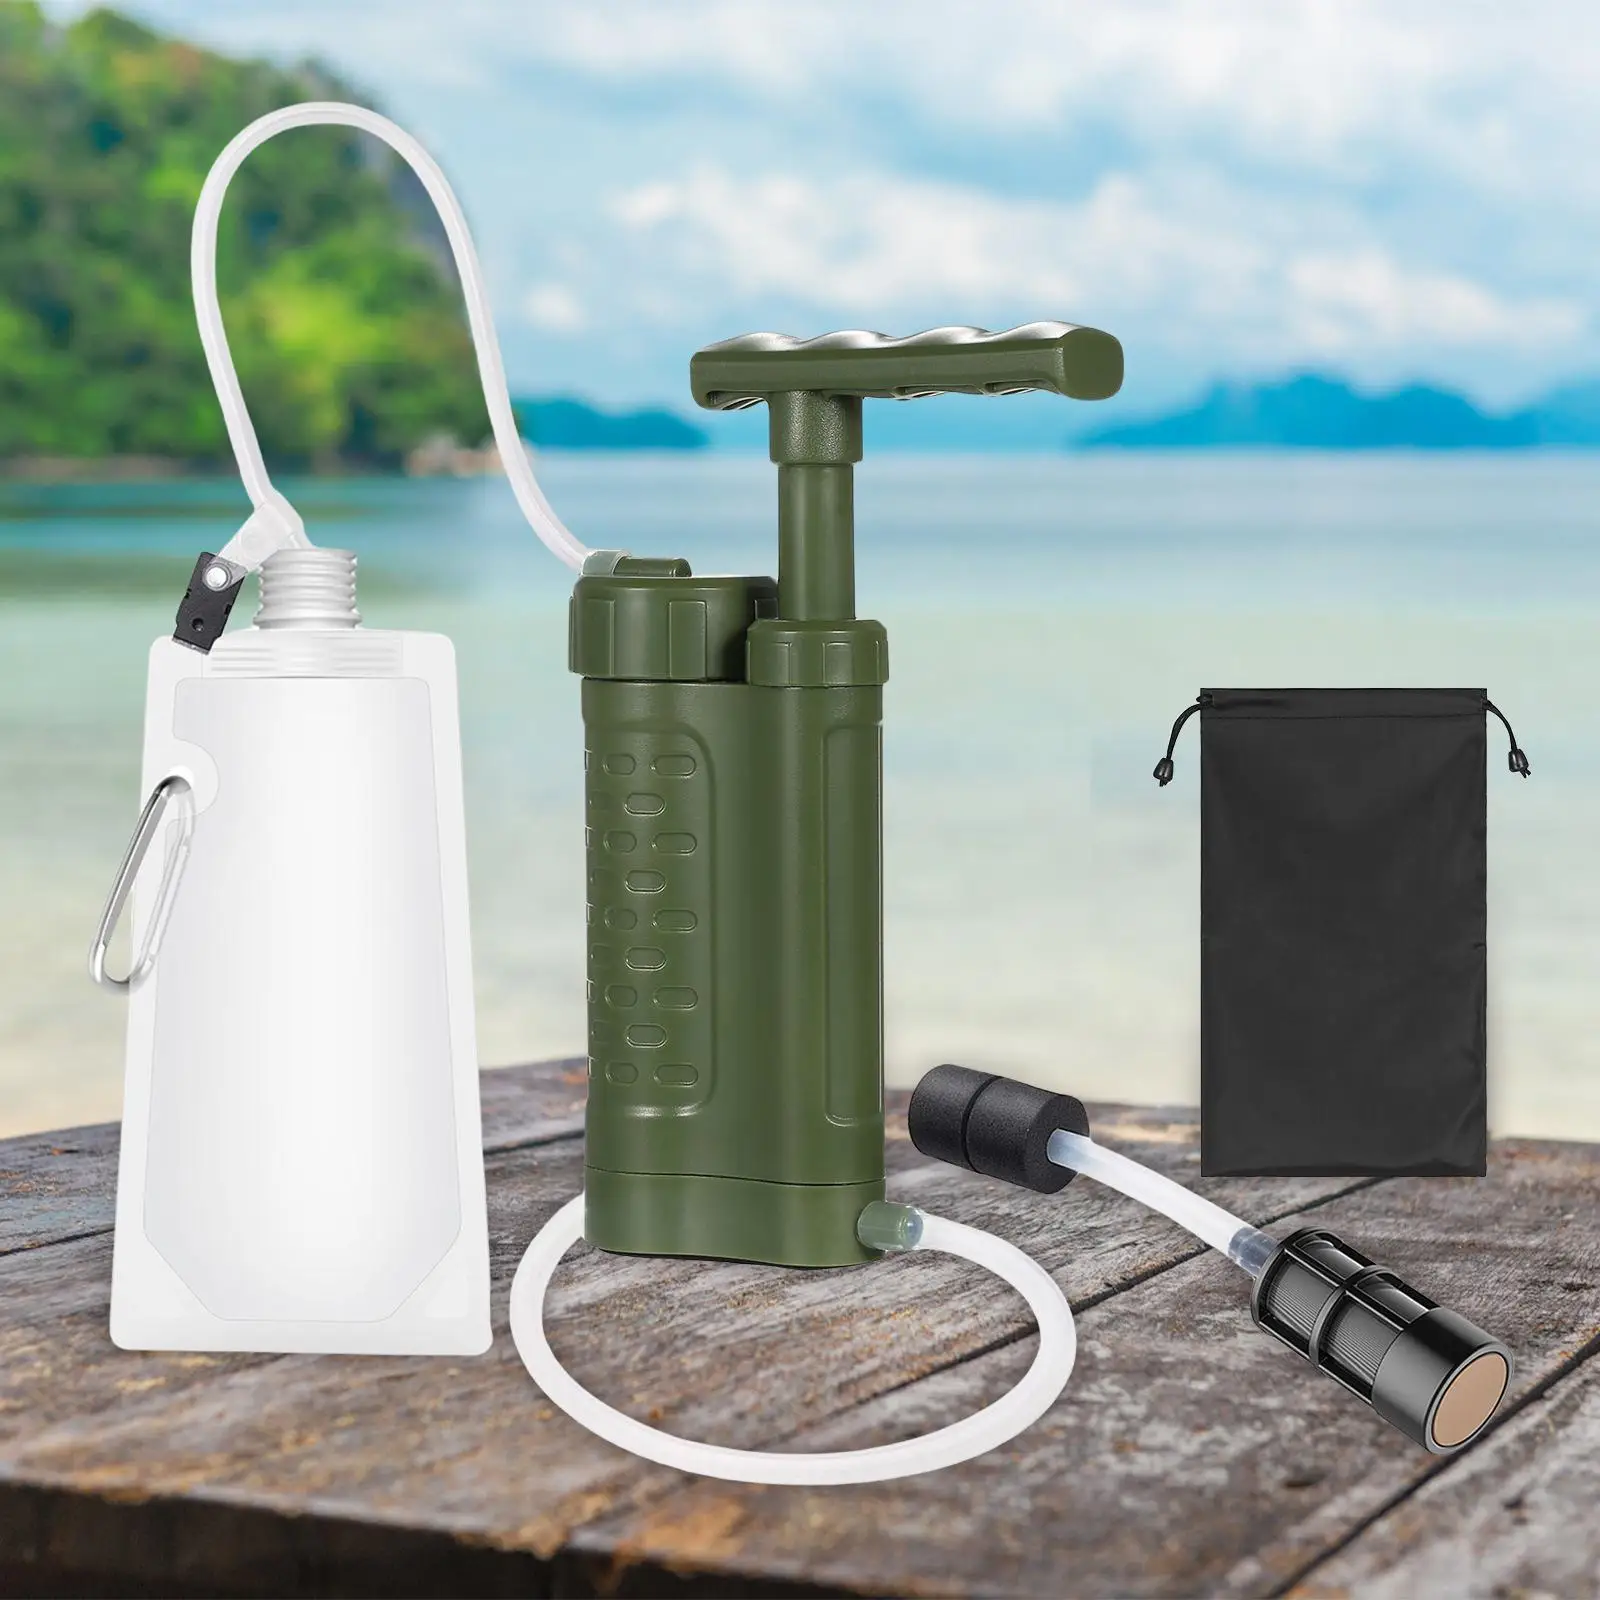 Portable Water Purifier Pump Personal Survival Gear for Camping Hiking Portable Water Filter Water Filter Pump for Travel Hiking